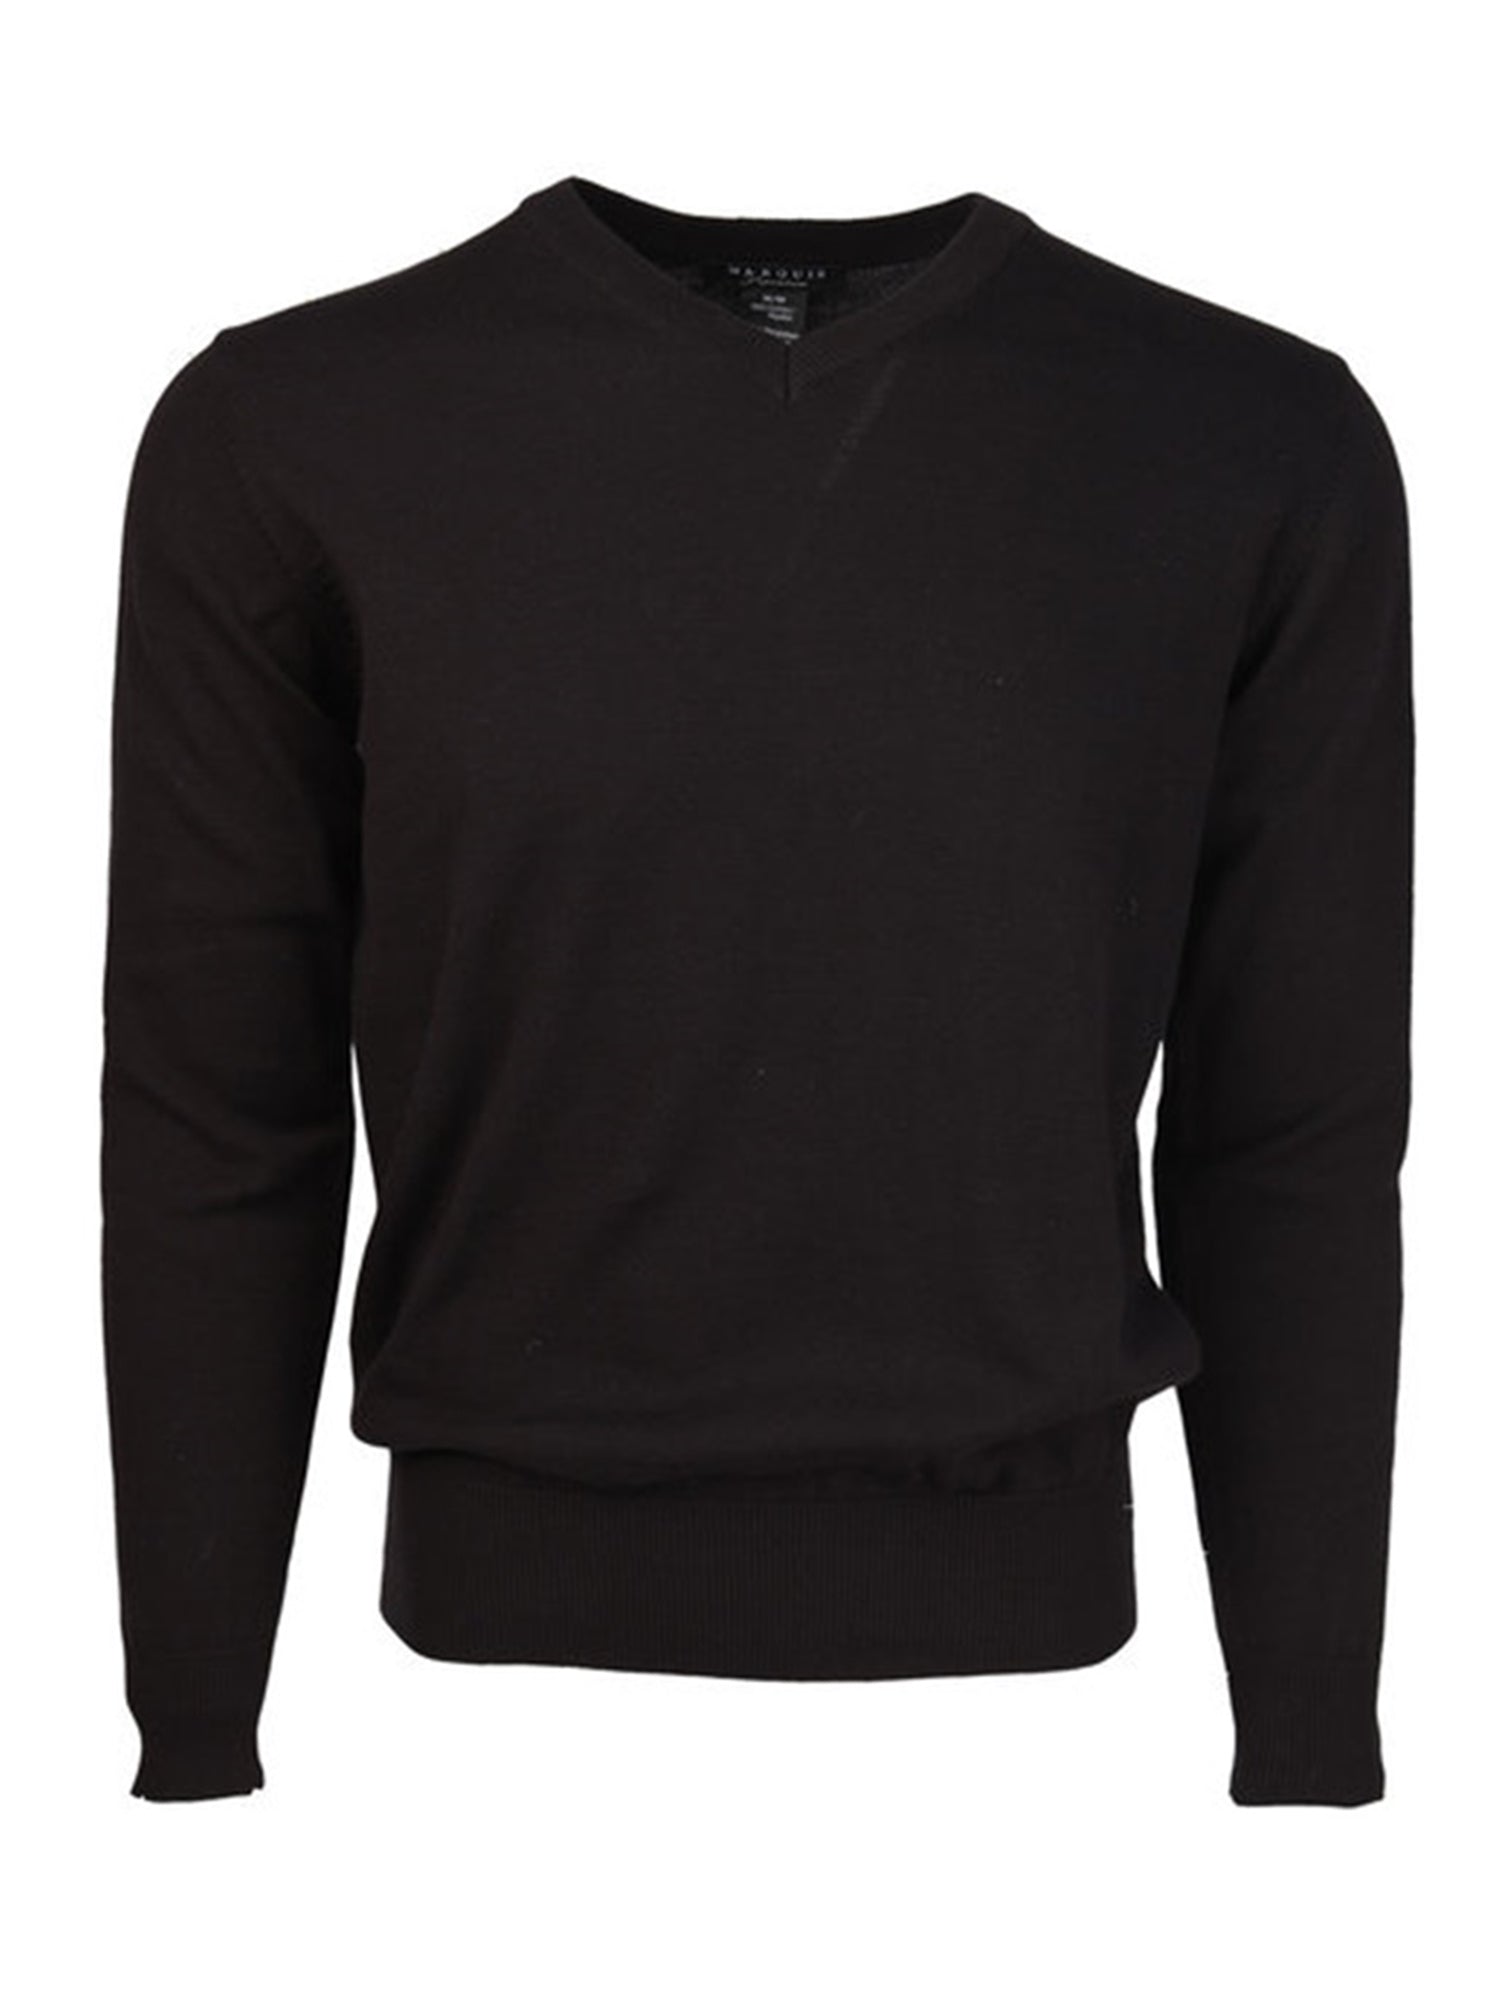 Marquis Modern Fit Solid V-neck Cotton Sweater Sweater Marquis Black S 